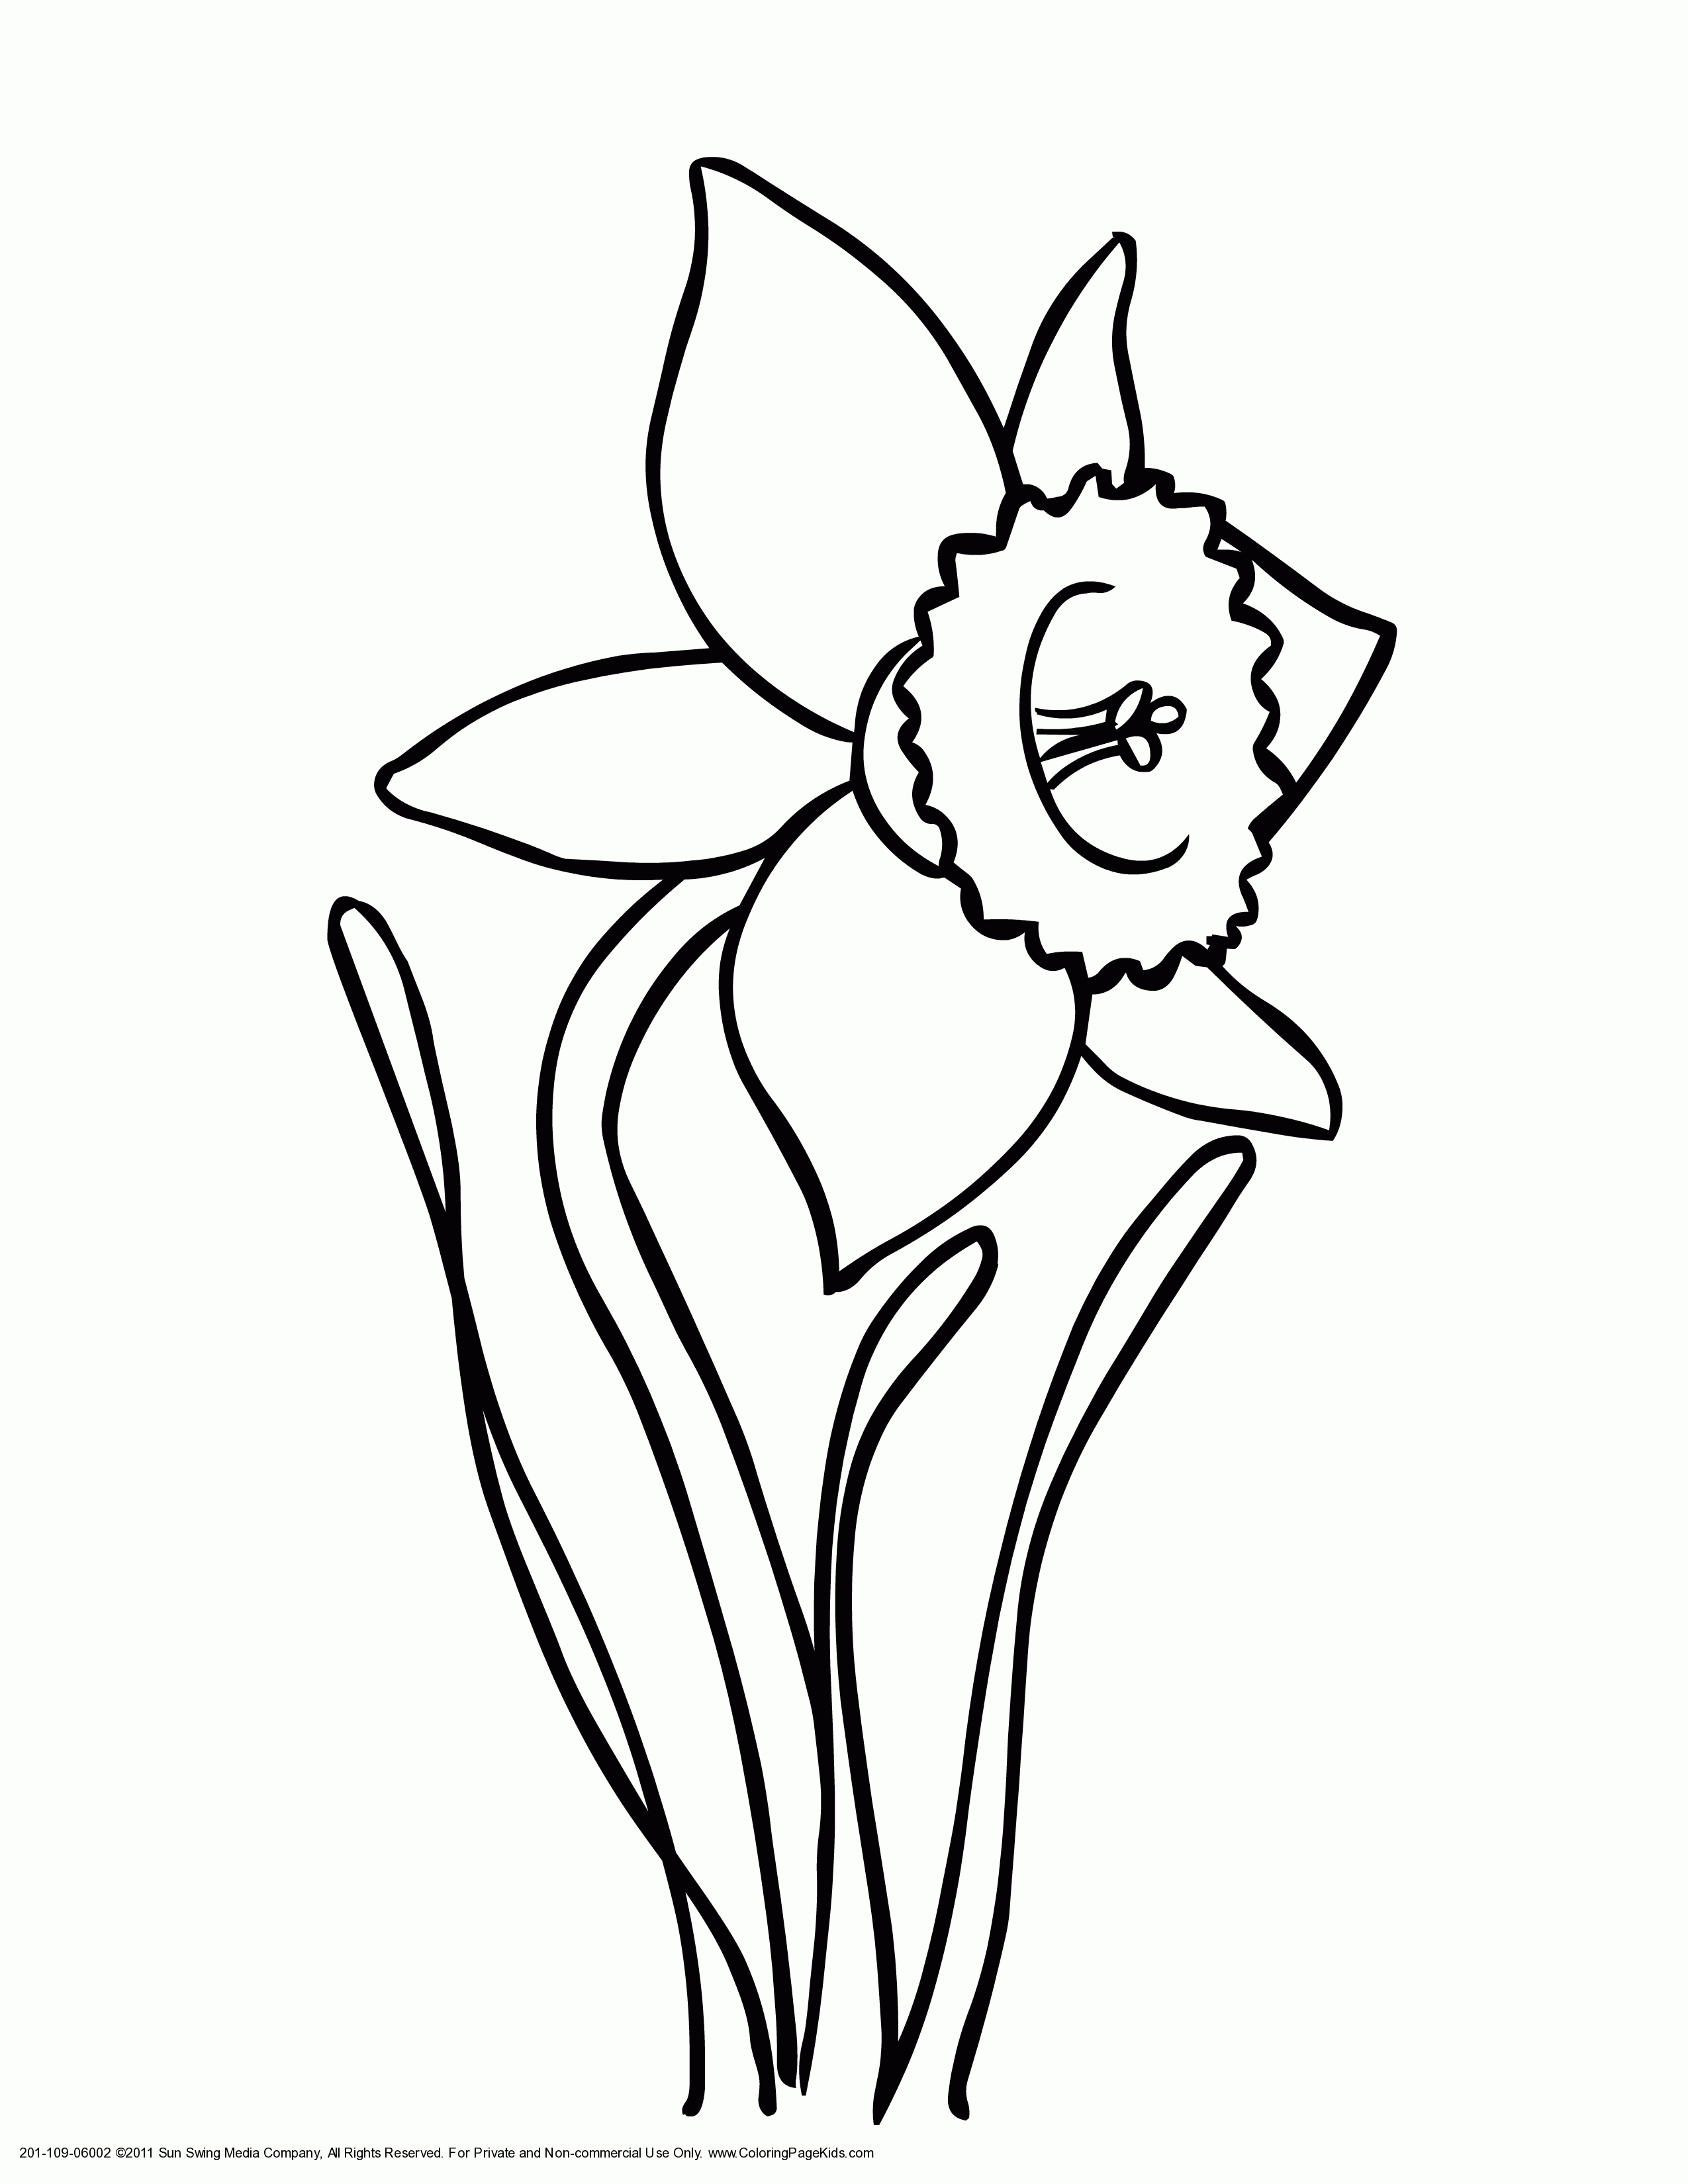 Free Drawings Of Daffodils, Download Free Clip Art, Free Clip Art On - Free Printable Pictures Of Daffodils